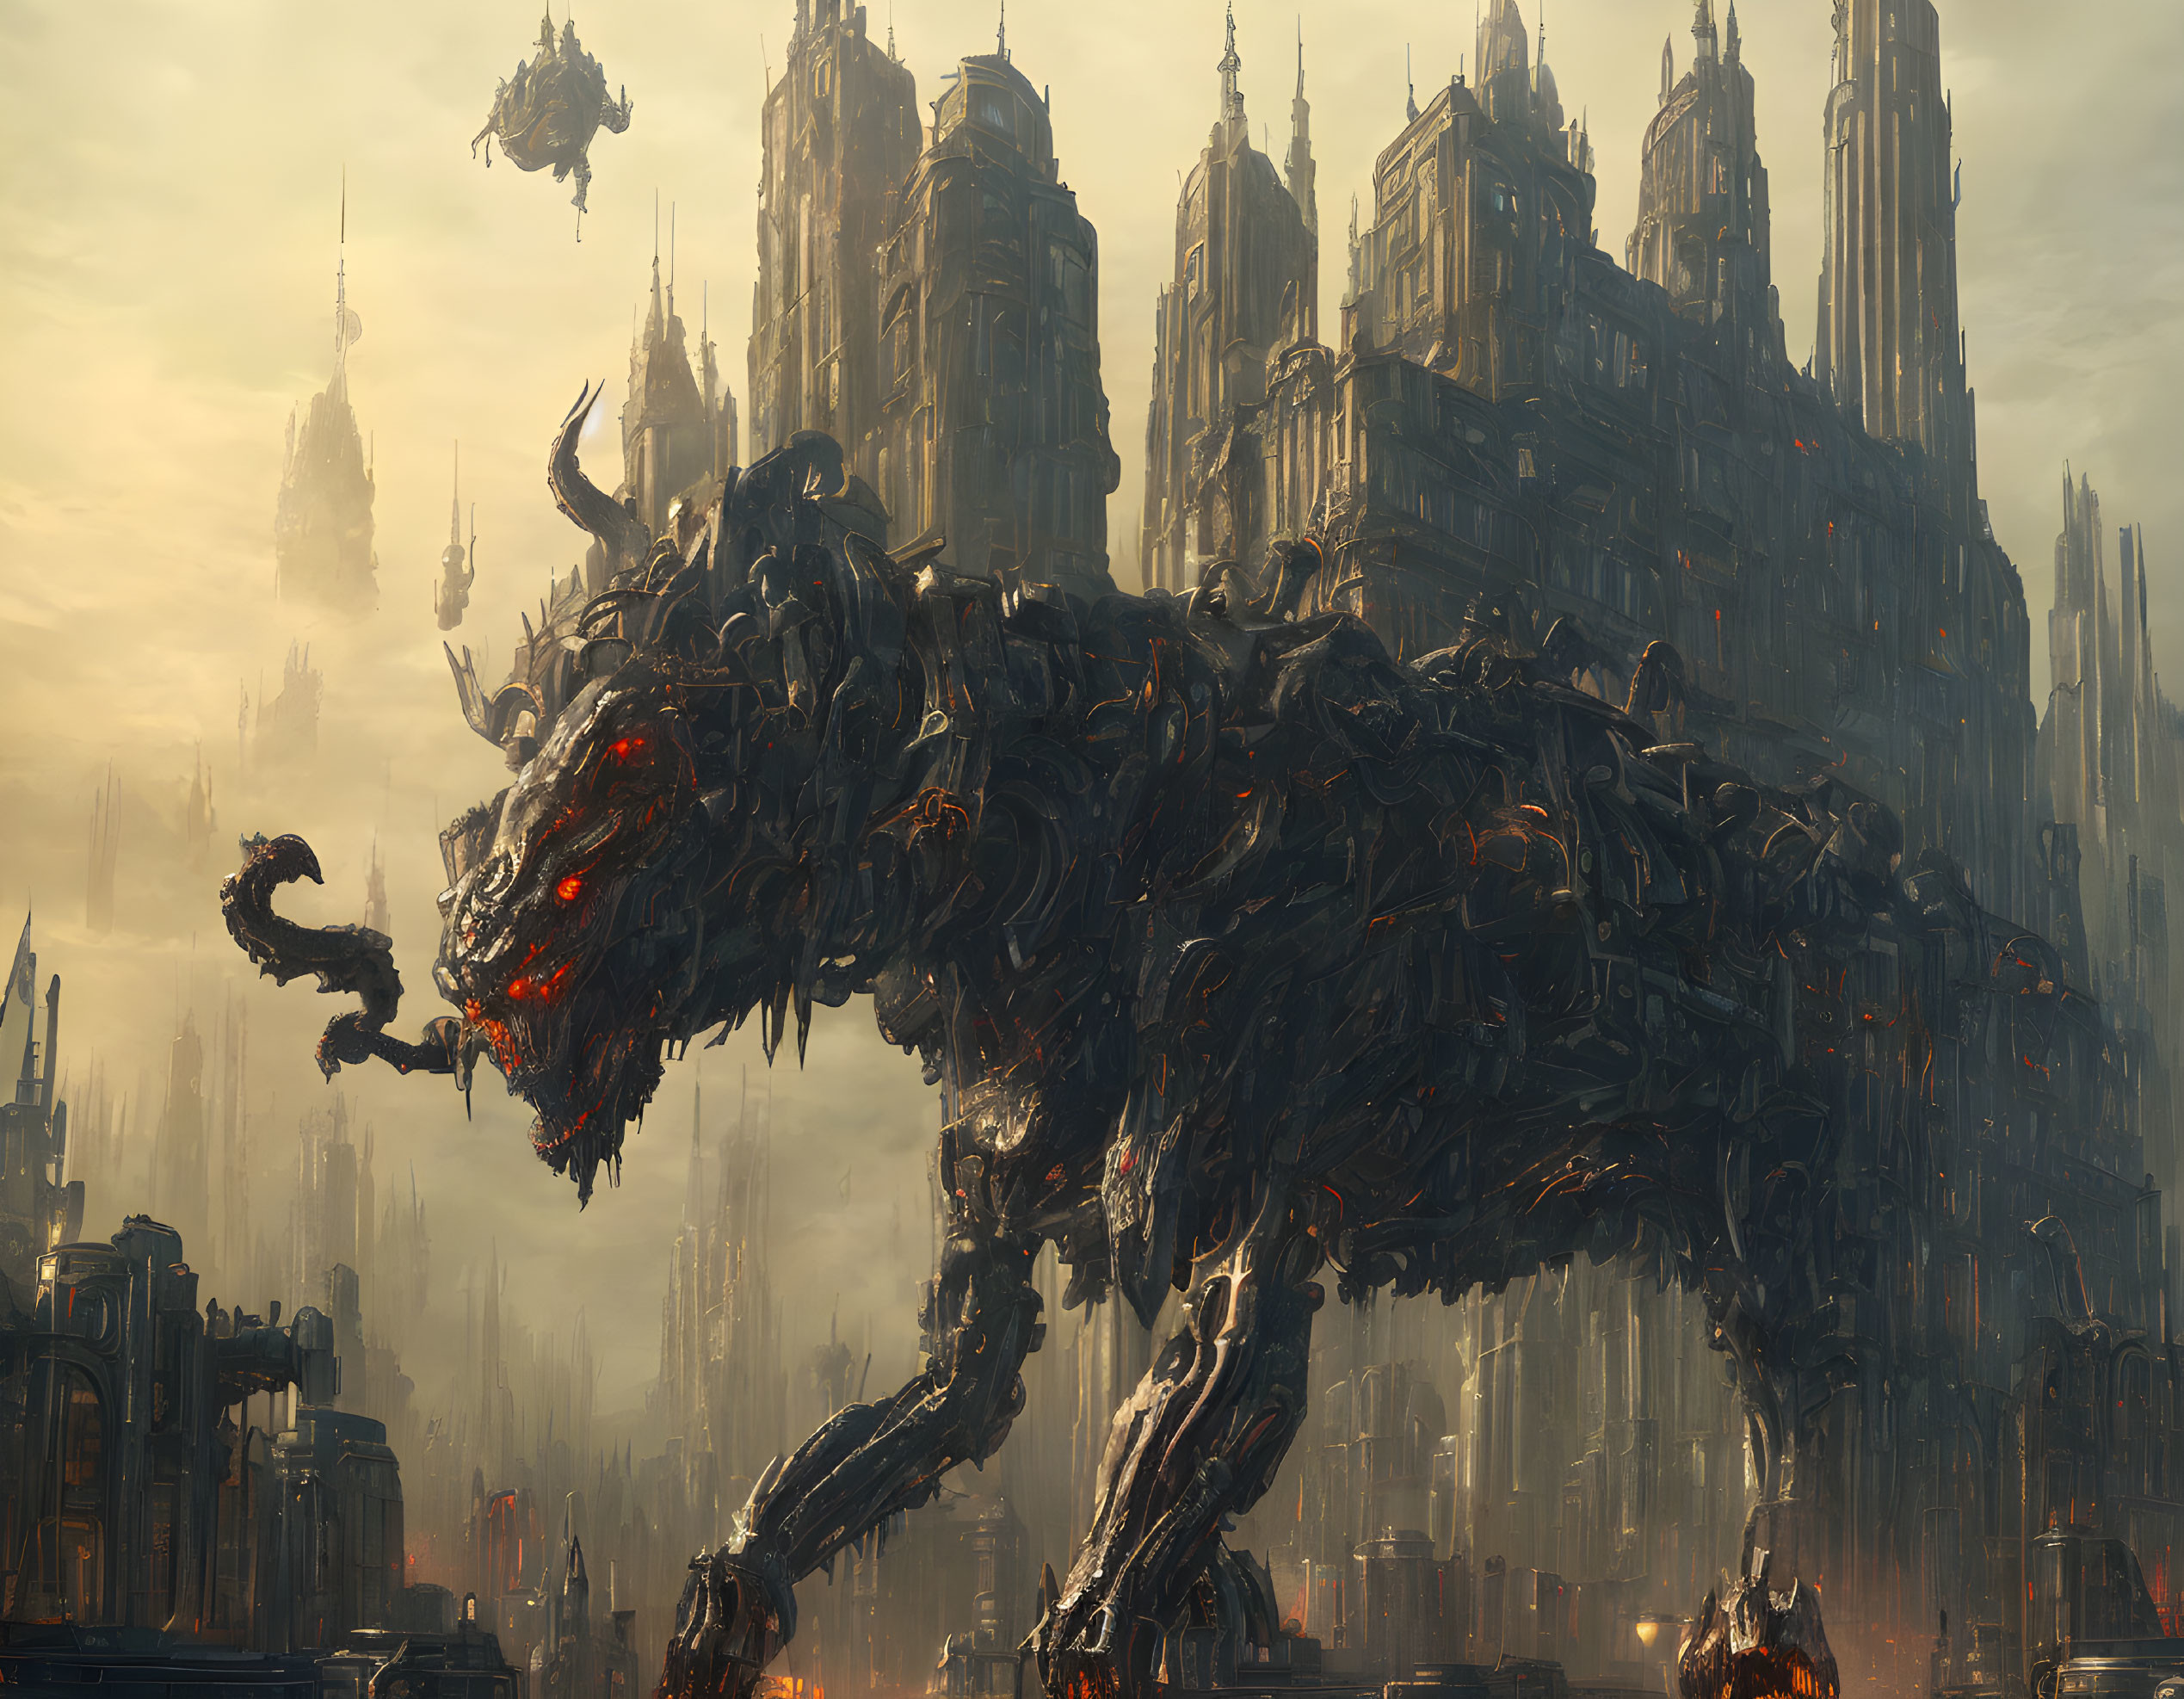 Gigantic mechanized beast with red eyes in front of gothic architecture under dystopian sky